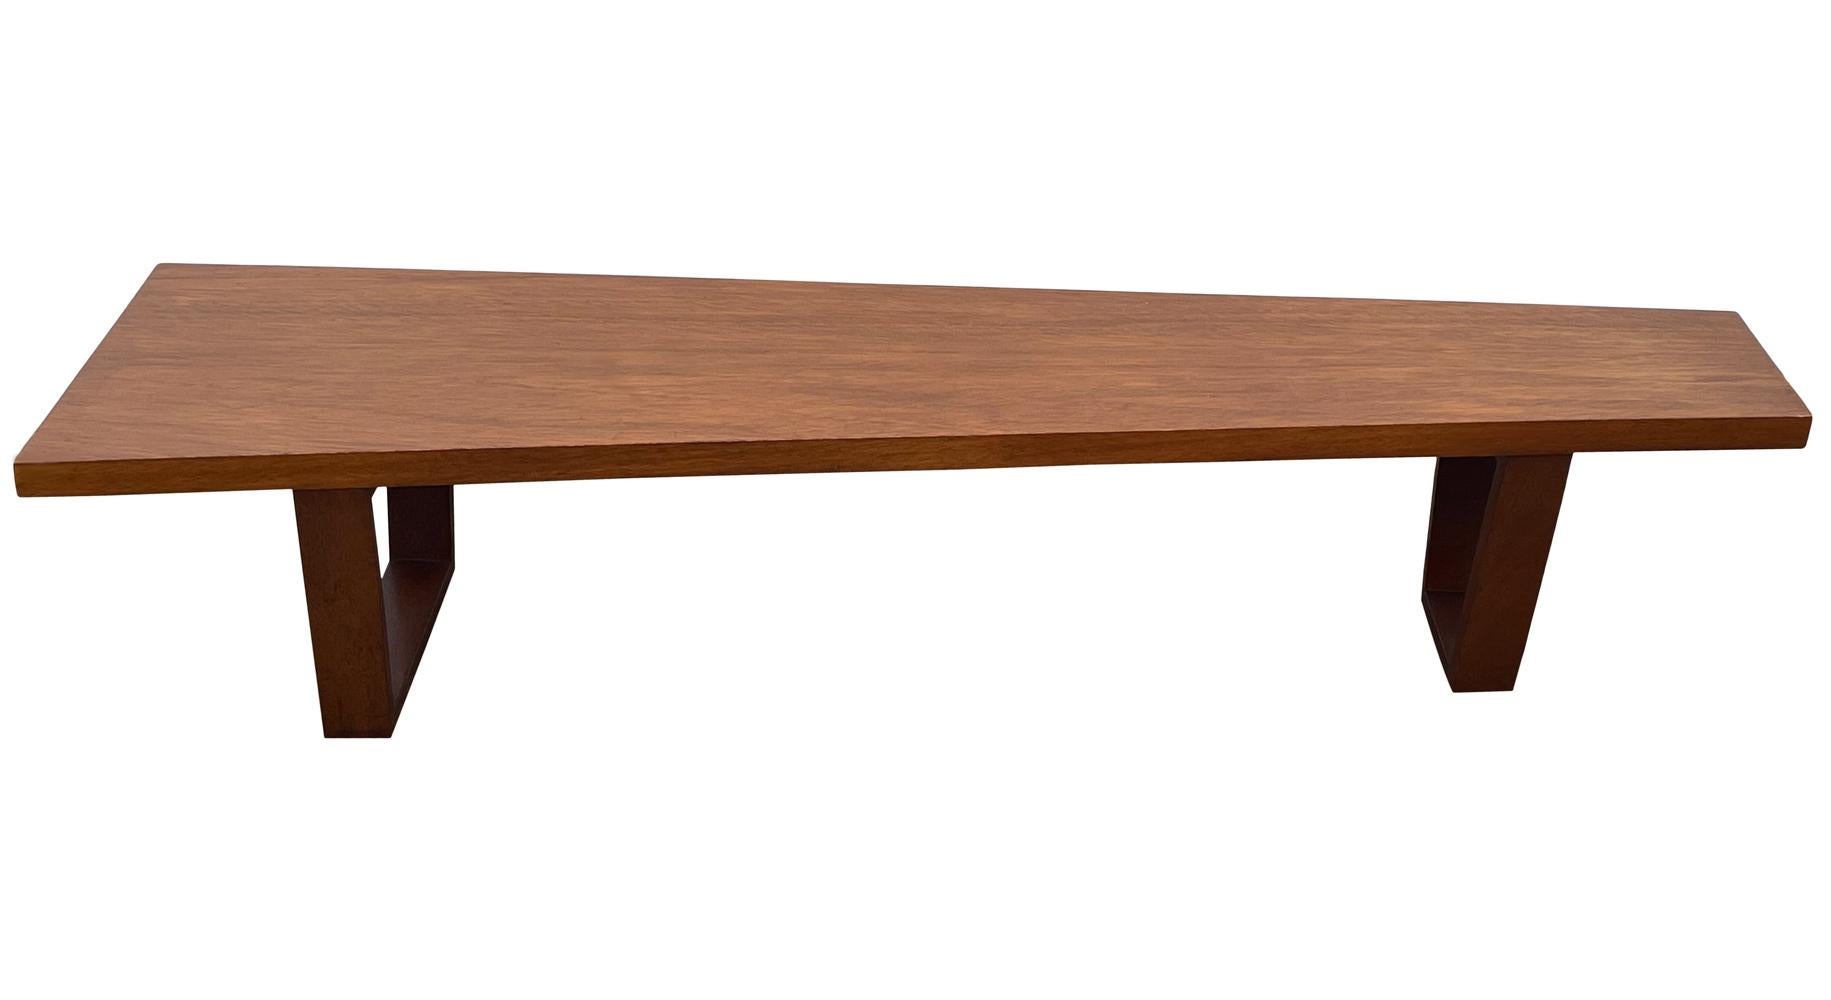 A beautifully made long bench or cocktail table circa 1960's. It feature a well proportioned asymmetrical design with solid wood construction. Very clean and ready to use.